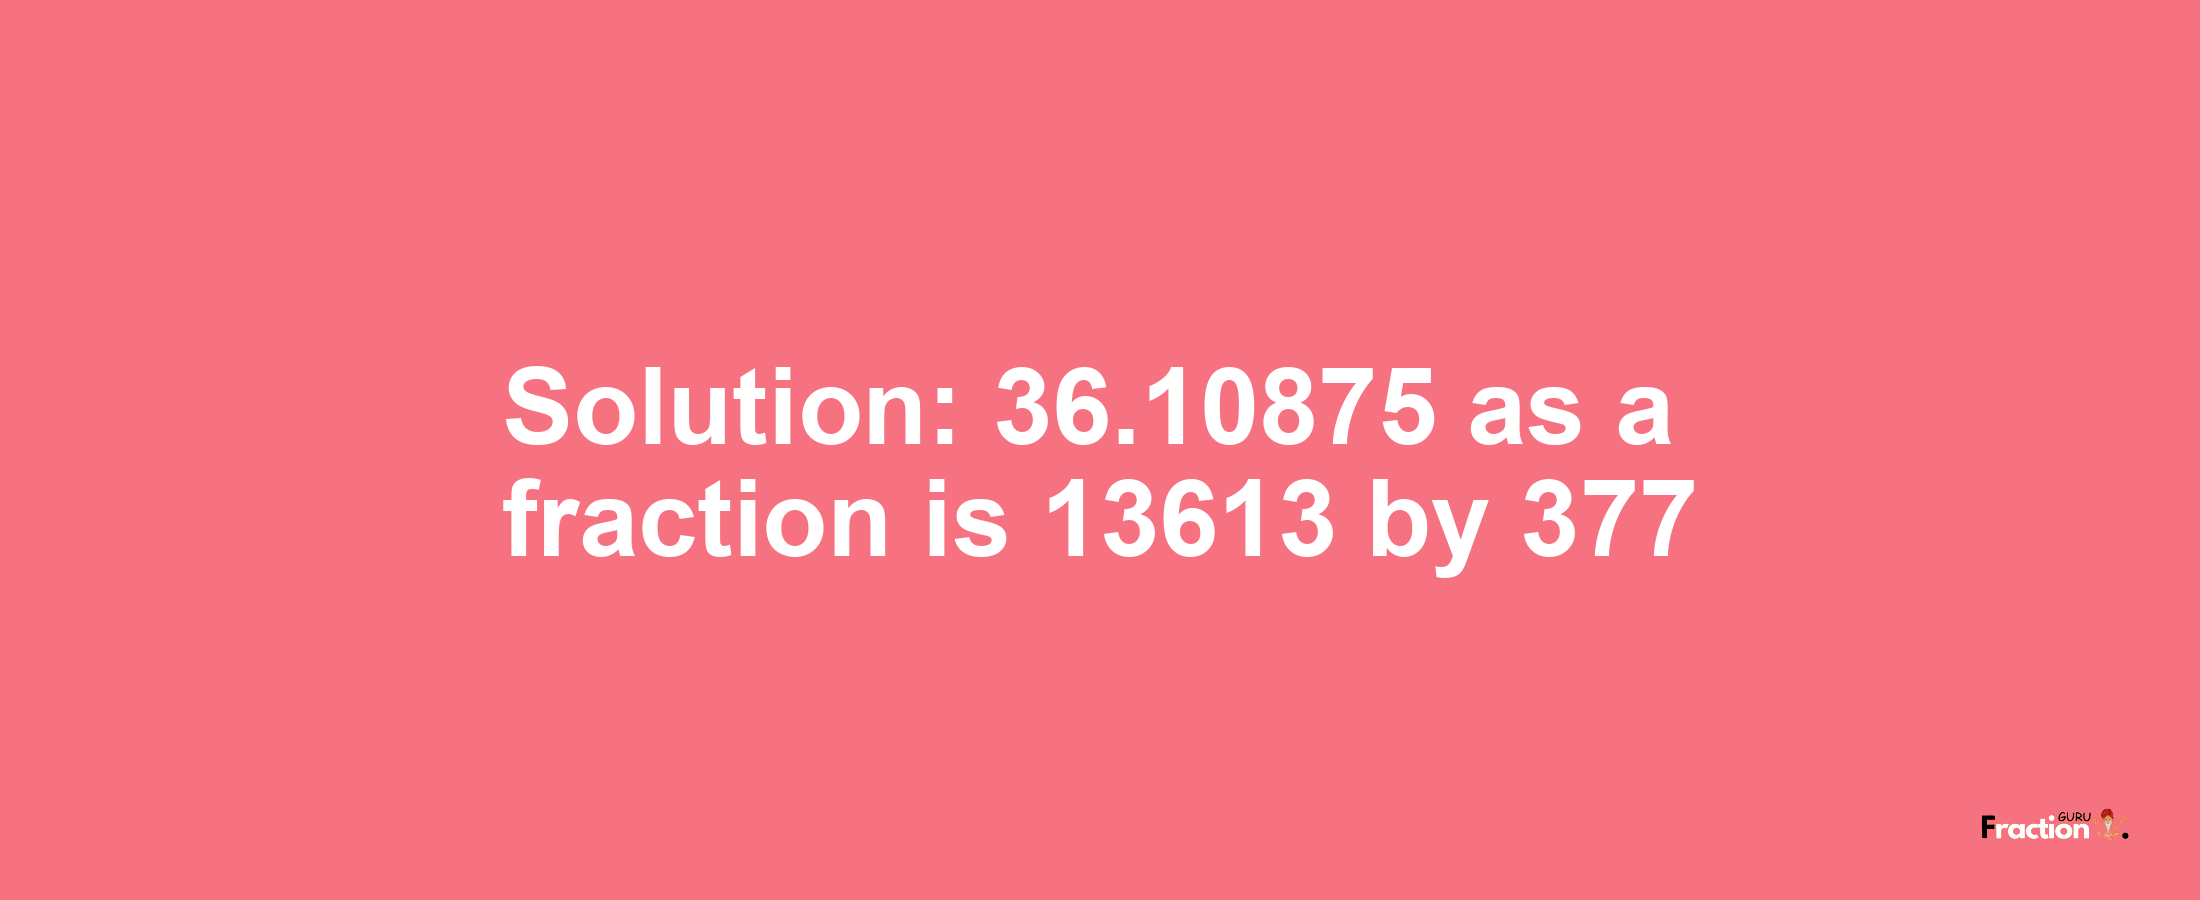 Solution:36.10875 as a fraction is 13613/377